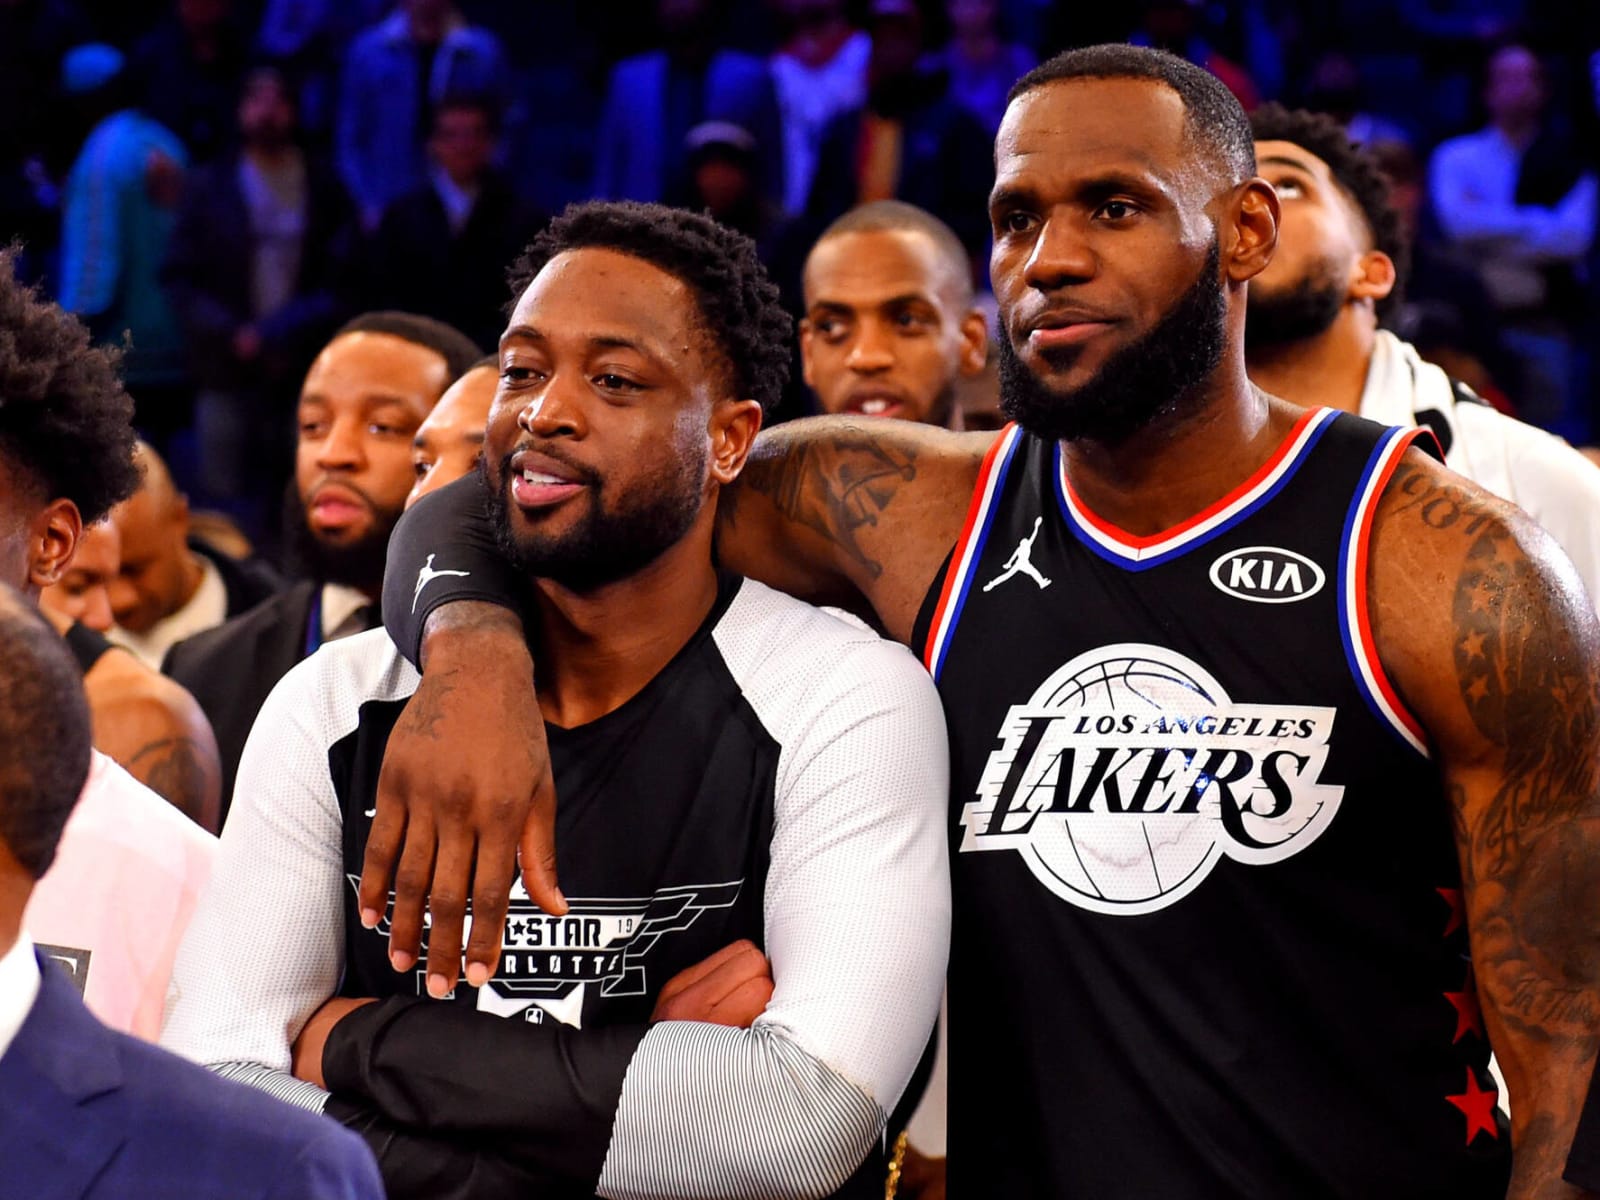 LeBron James and Dwyane Wade-produced documentary “The Redeem Team” to be  streamed on Netflix - AS USA